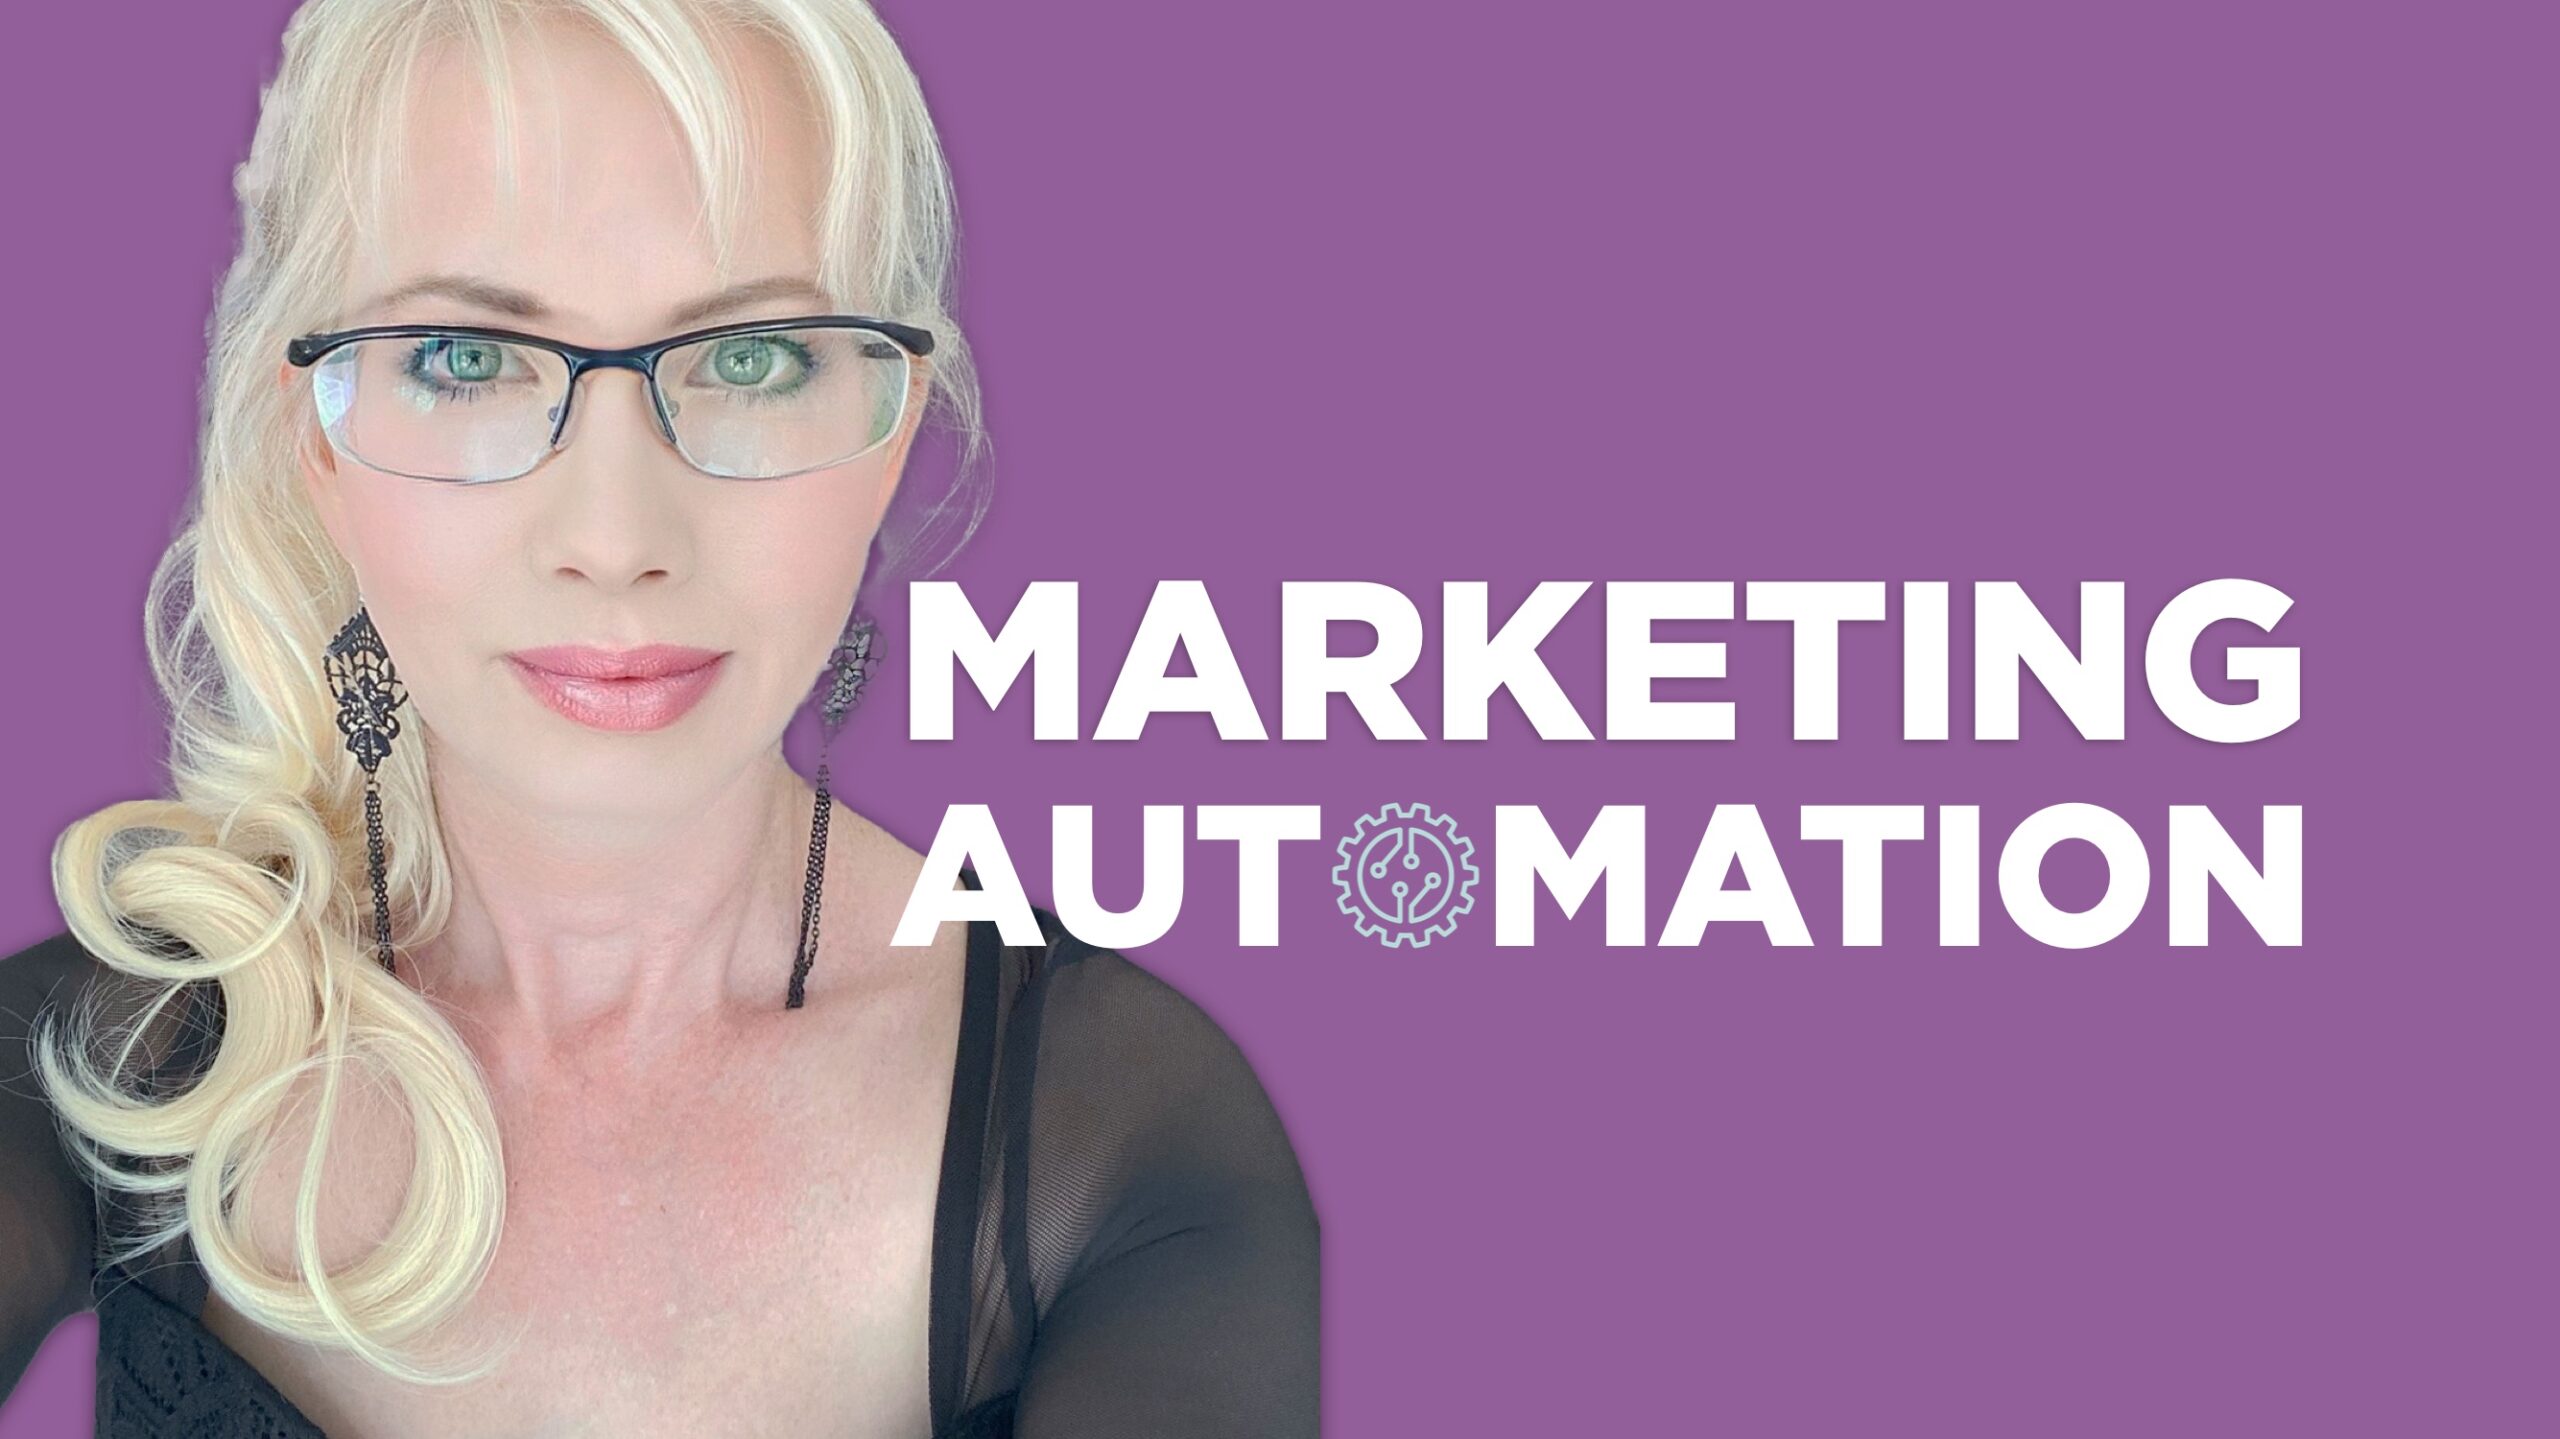 194 – Leveraging Marketing Automation for Business Growth and Customer Relationships with Laura Kerbyson